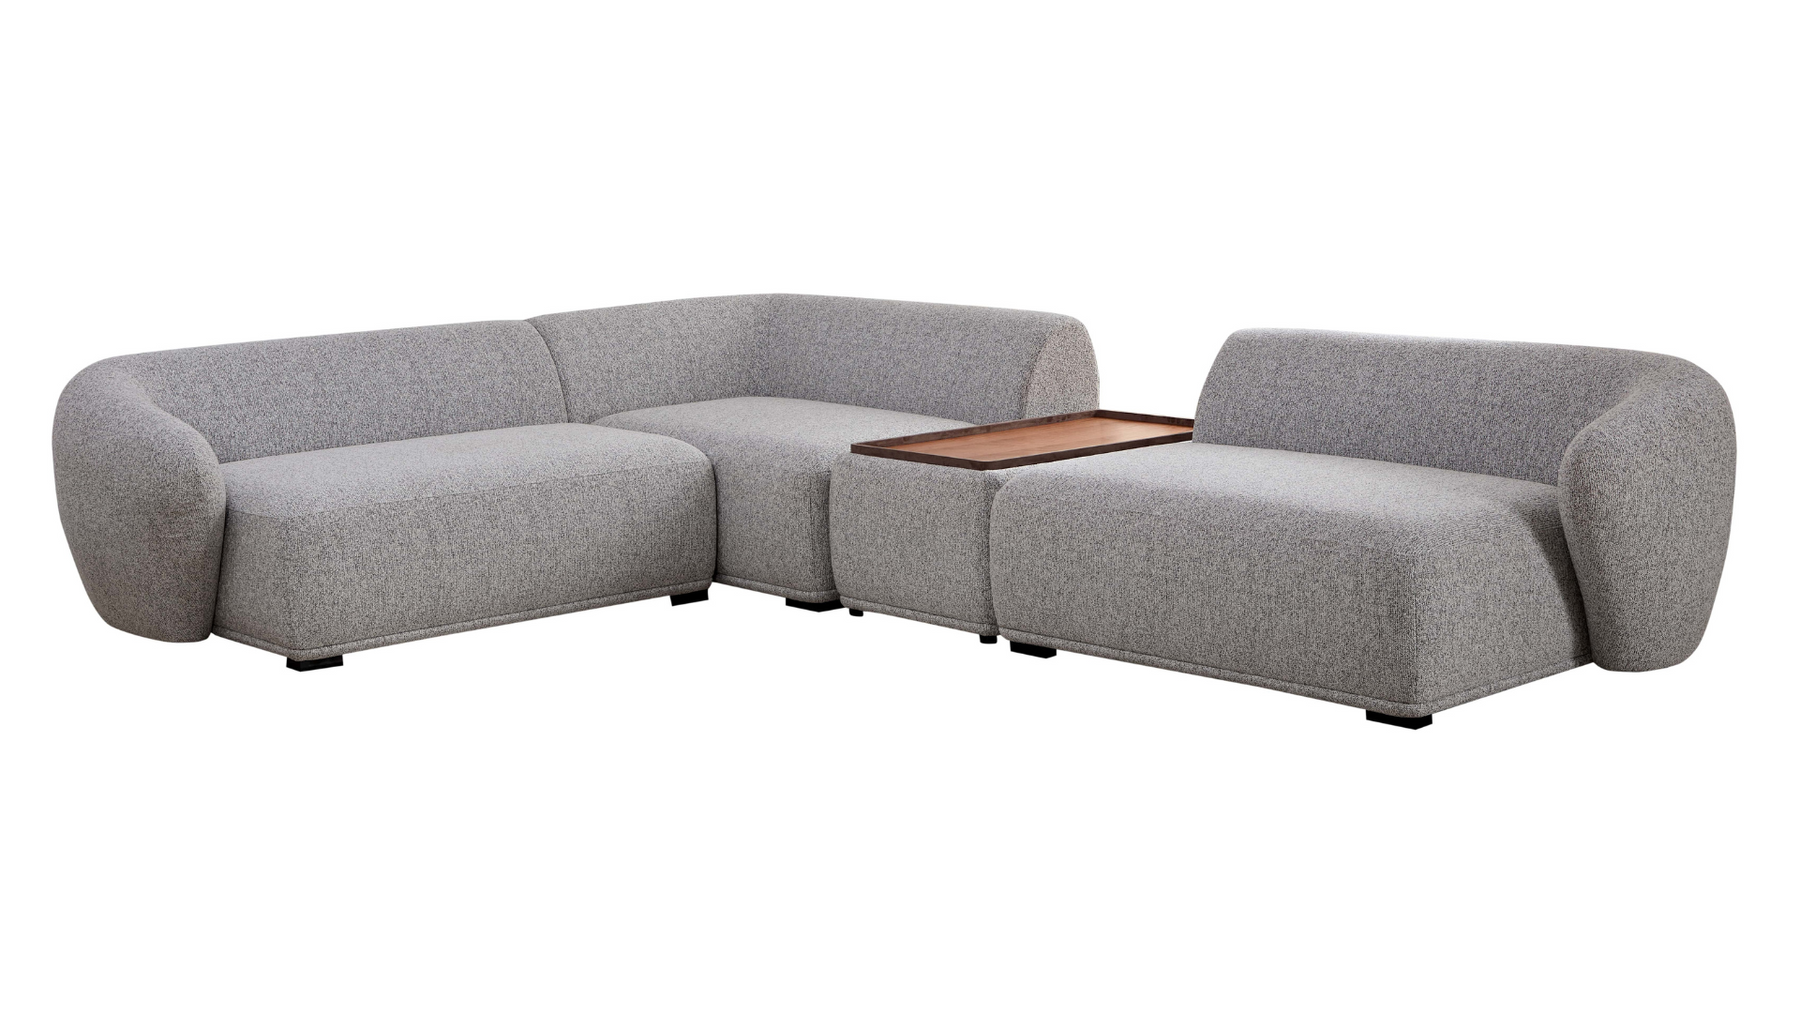 Charles Modular Sofa in Angled View on White Background